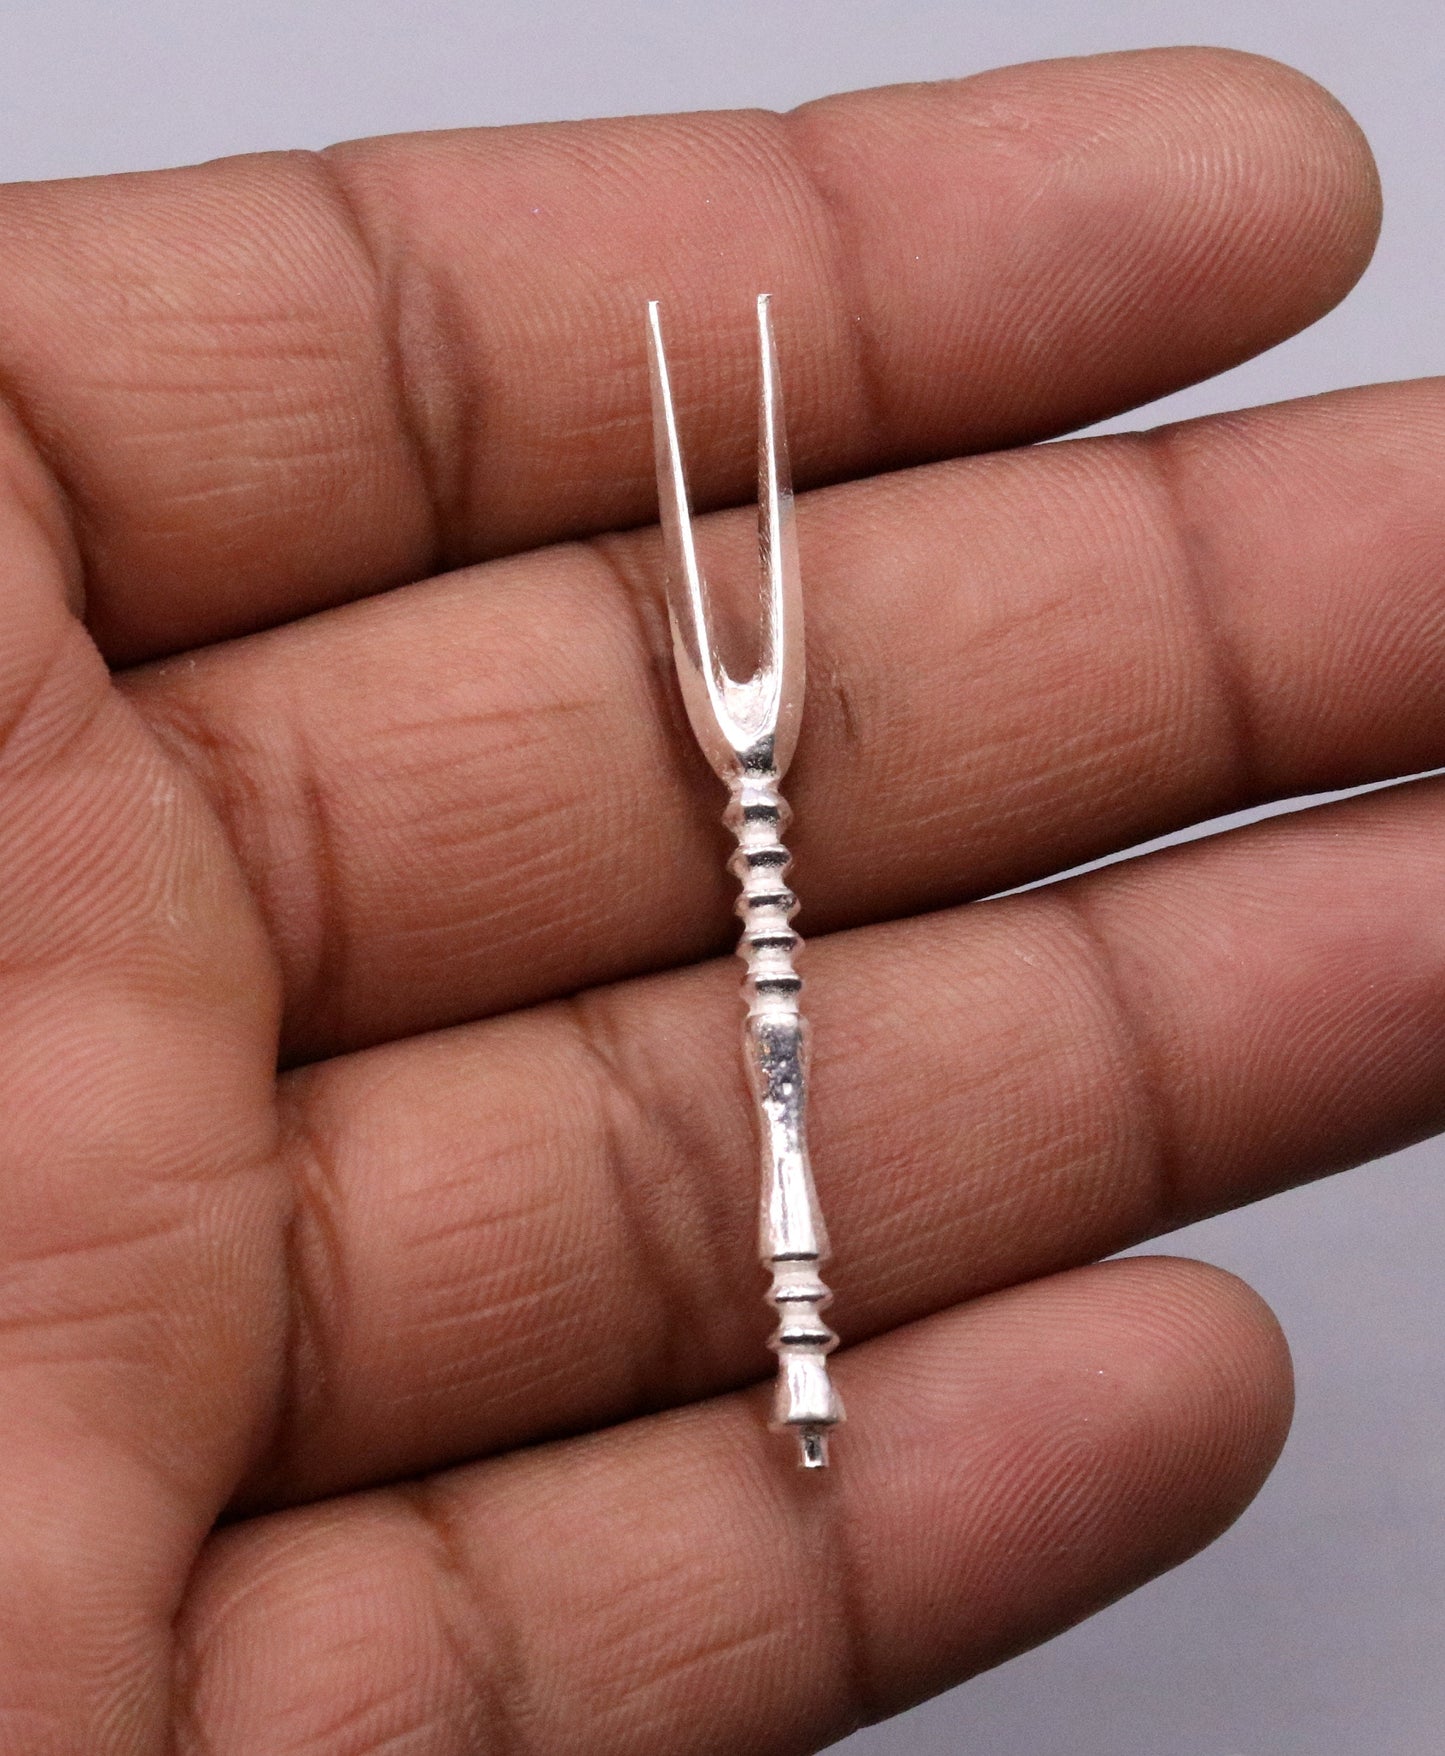 handmade solid silver chopsticks / knife and fork snack fruit food fork excellent hand crafted design daily use spoon03 - TRIBAL ORNAMENTS